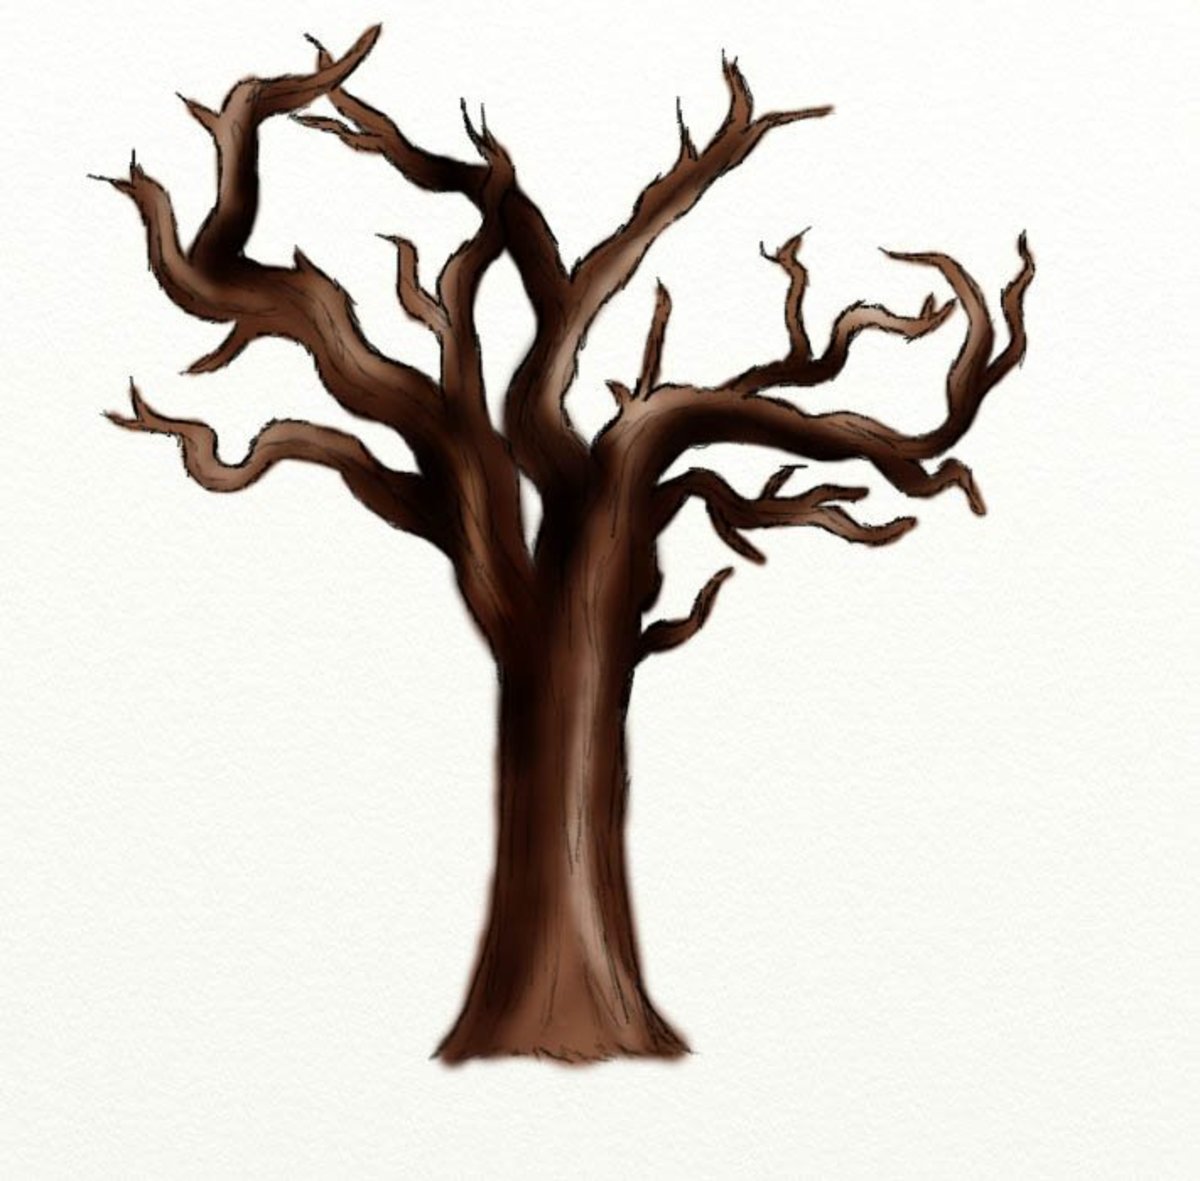 How to Draw a Dead Tree | FeltMagnet